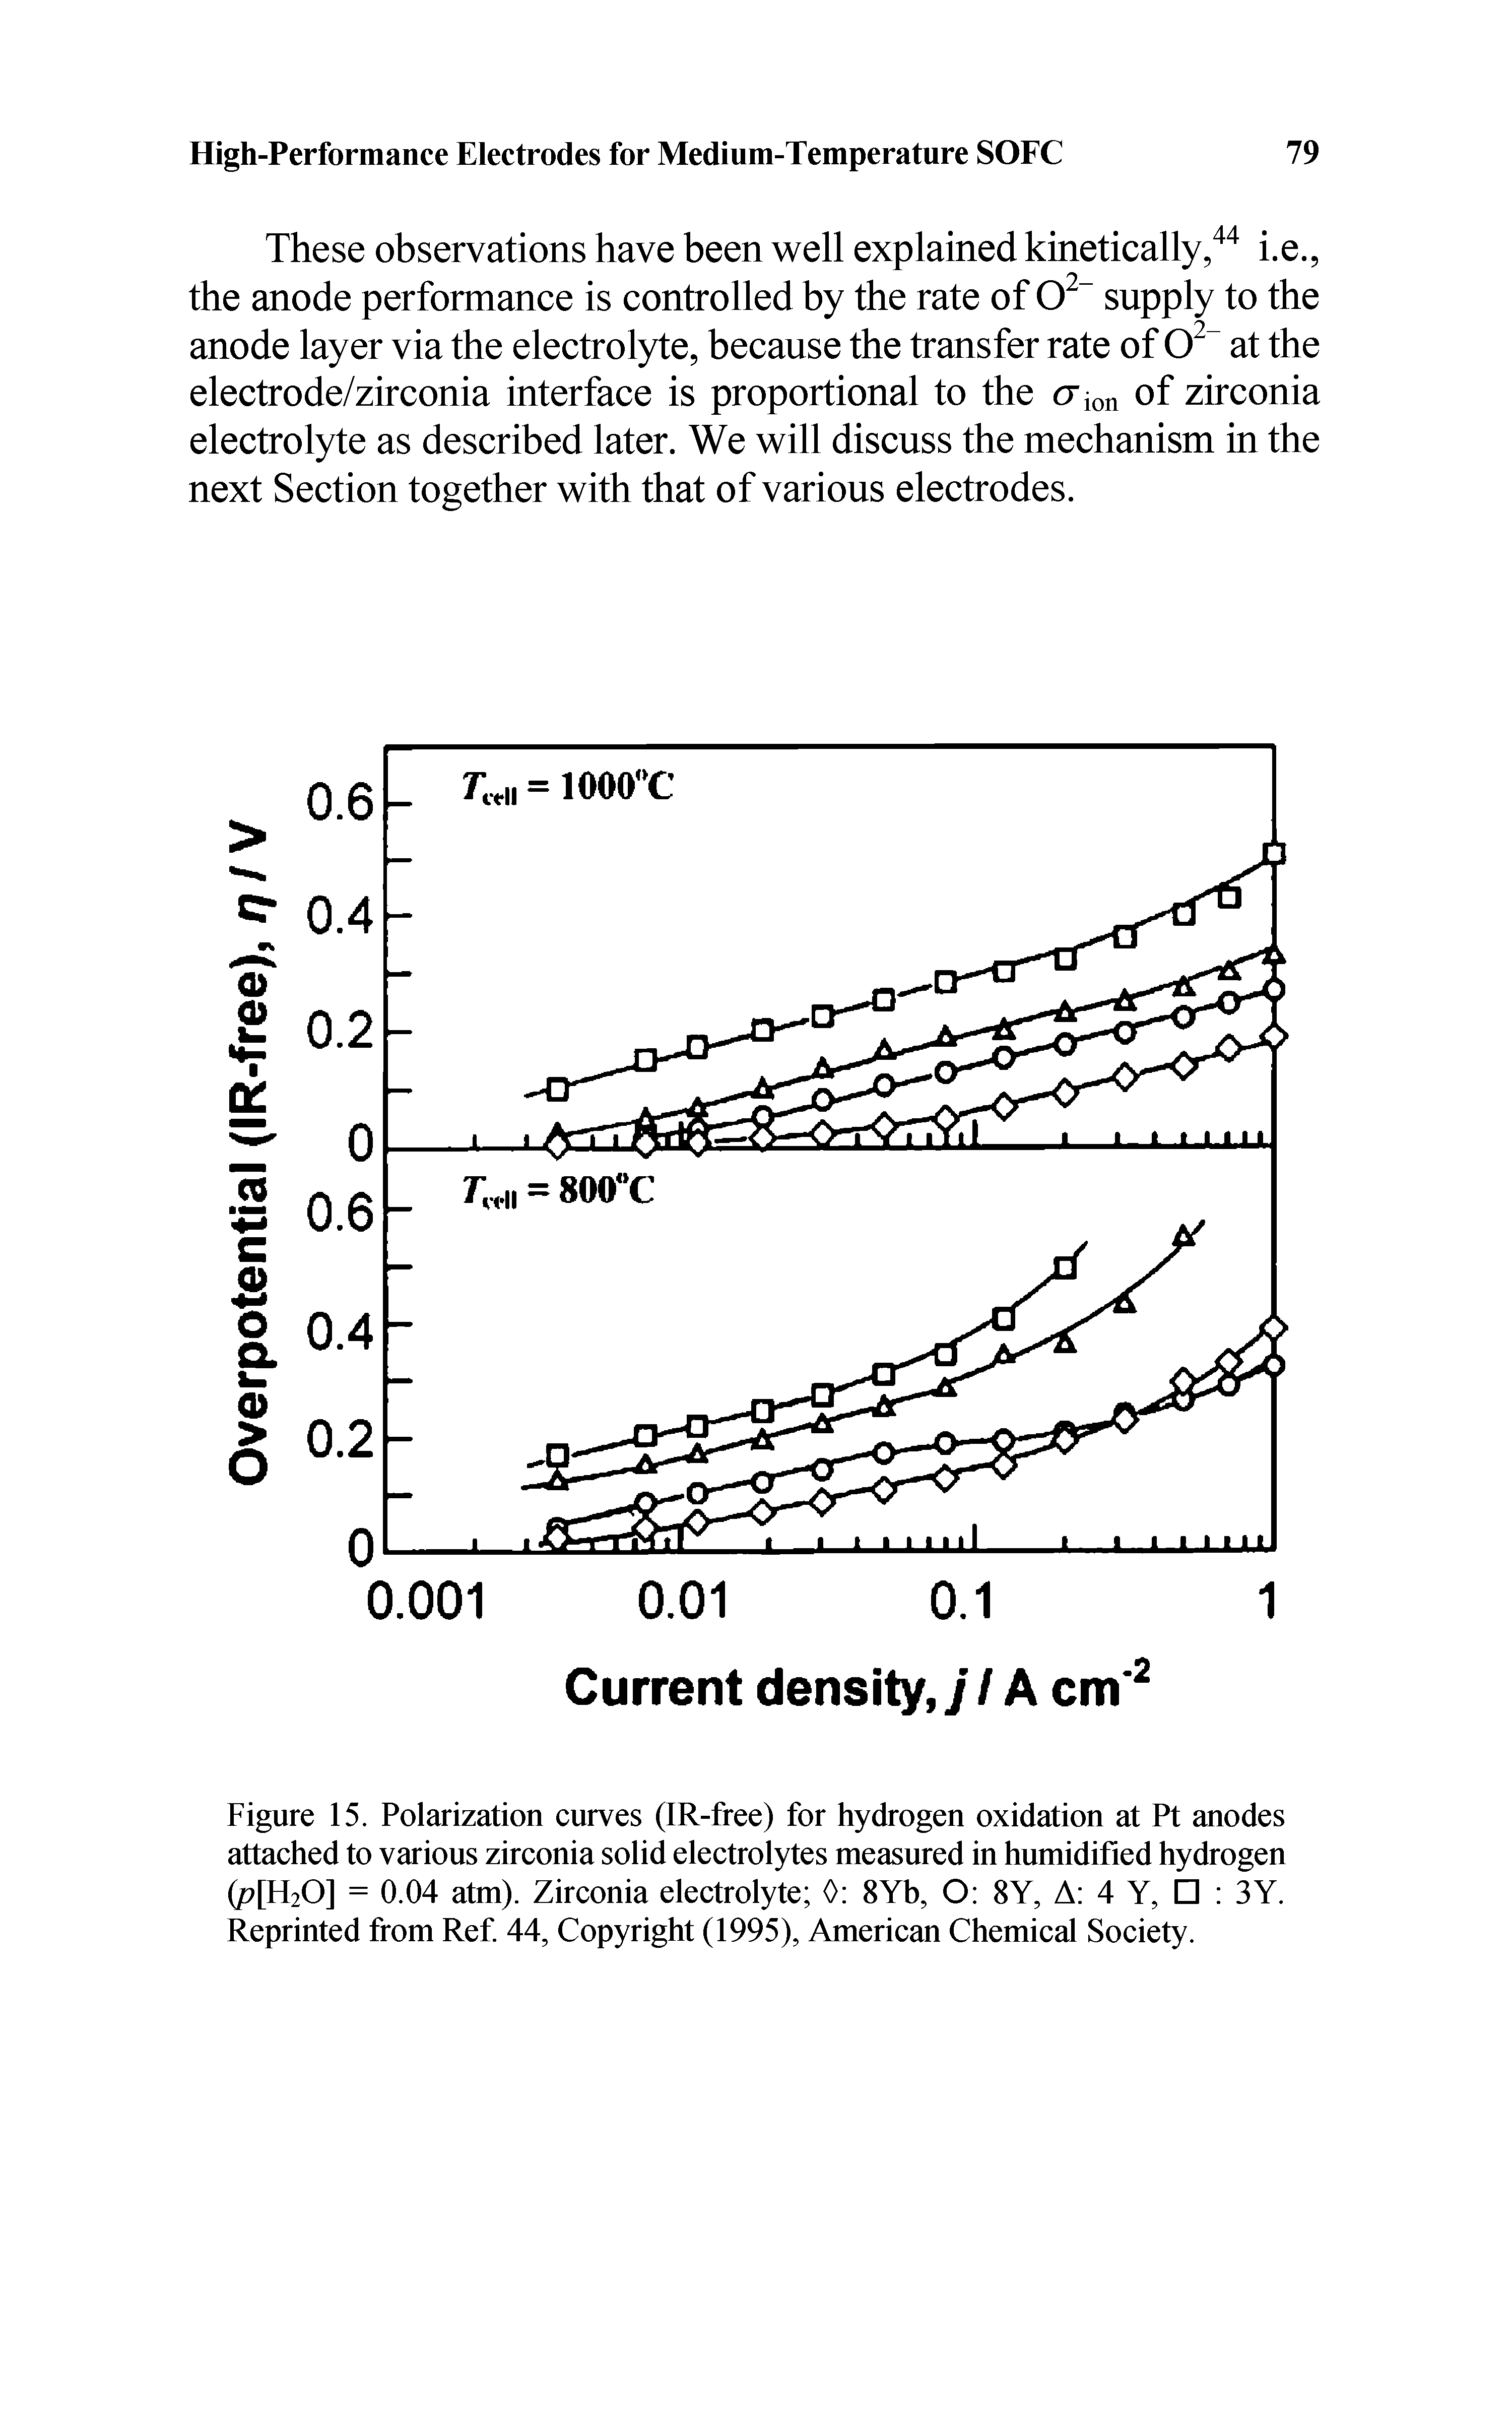 Figure 15. Polarization curves (IR-free) for hydrogen oxidation at Pt anodes attached to various zirconia solid electrolytes measured in humidified hydrogen ( [H2O] = 0.04 atm). Zirconia electrolyte 0 8Yb, O 8Y, A 4 Y, 3Y. Reprinted from Ref. 44, Copyright (1995), American Chemical Society.